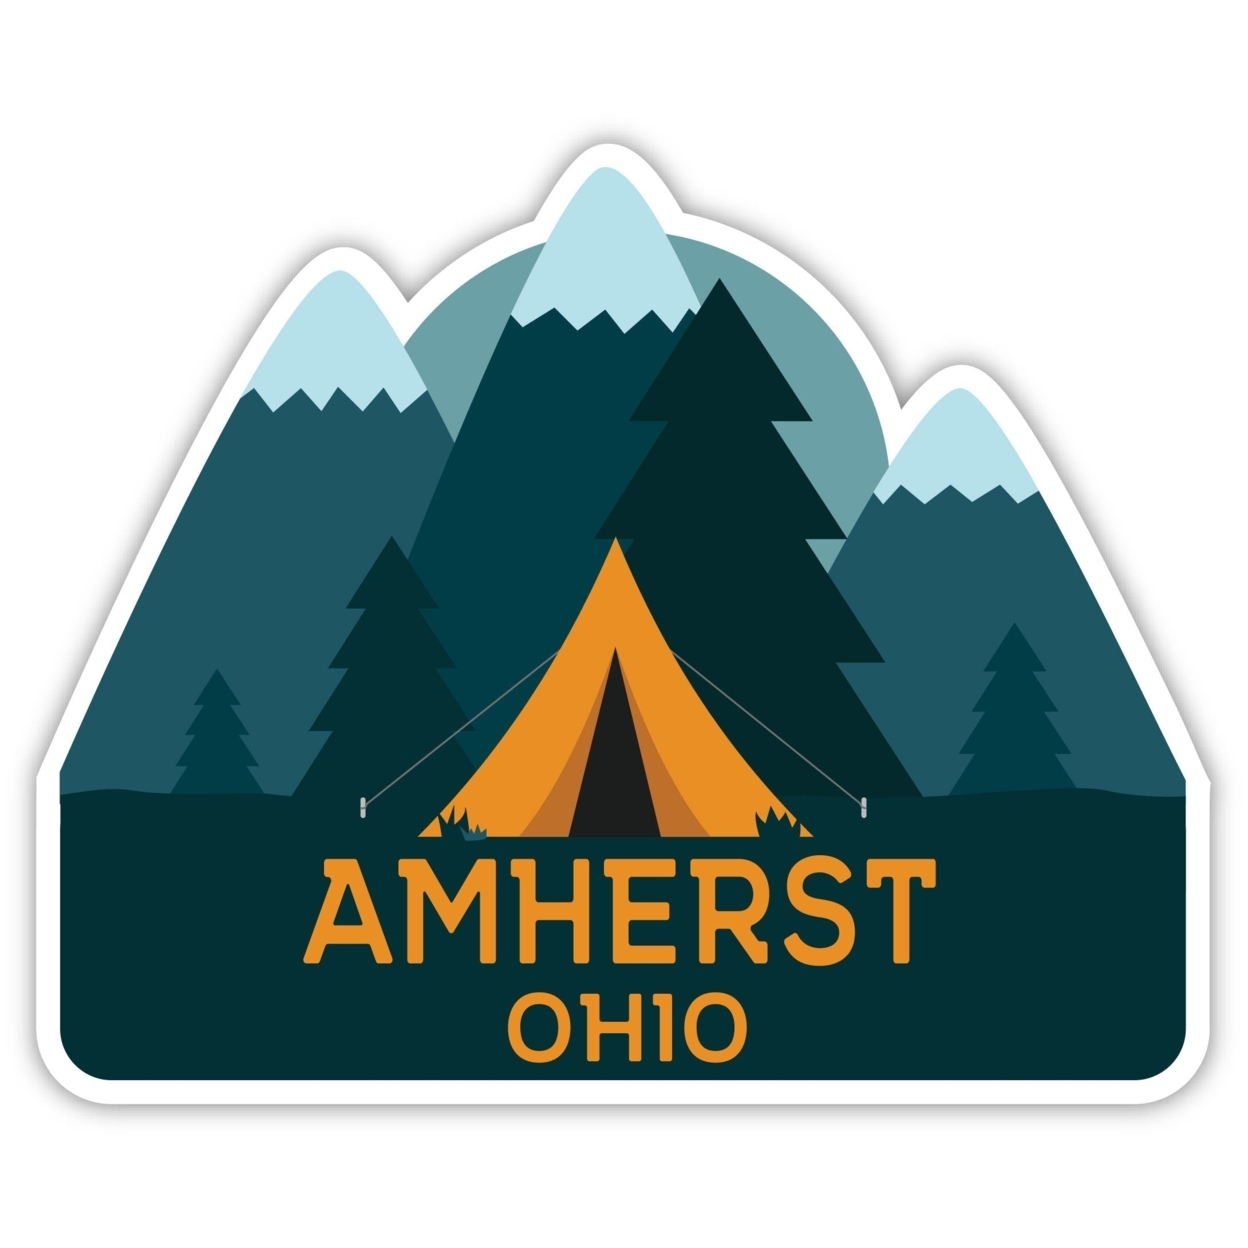 Amherst Ohio Souvenir Decorative Stickers (Choose Theme And Size) - 4-Pack, 4-Inch, Tent